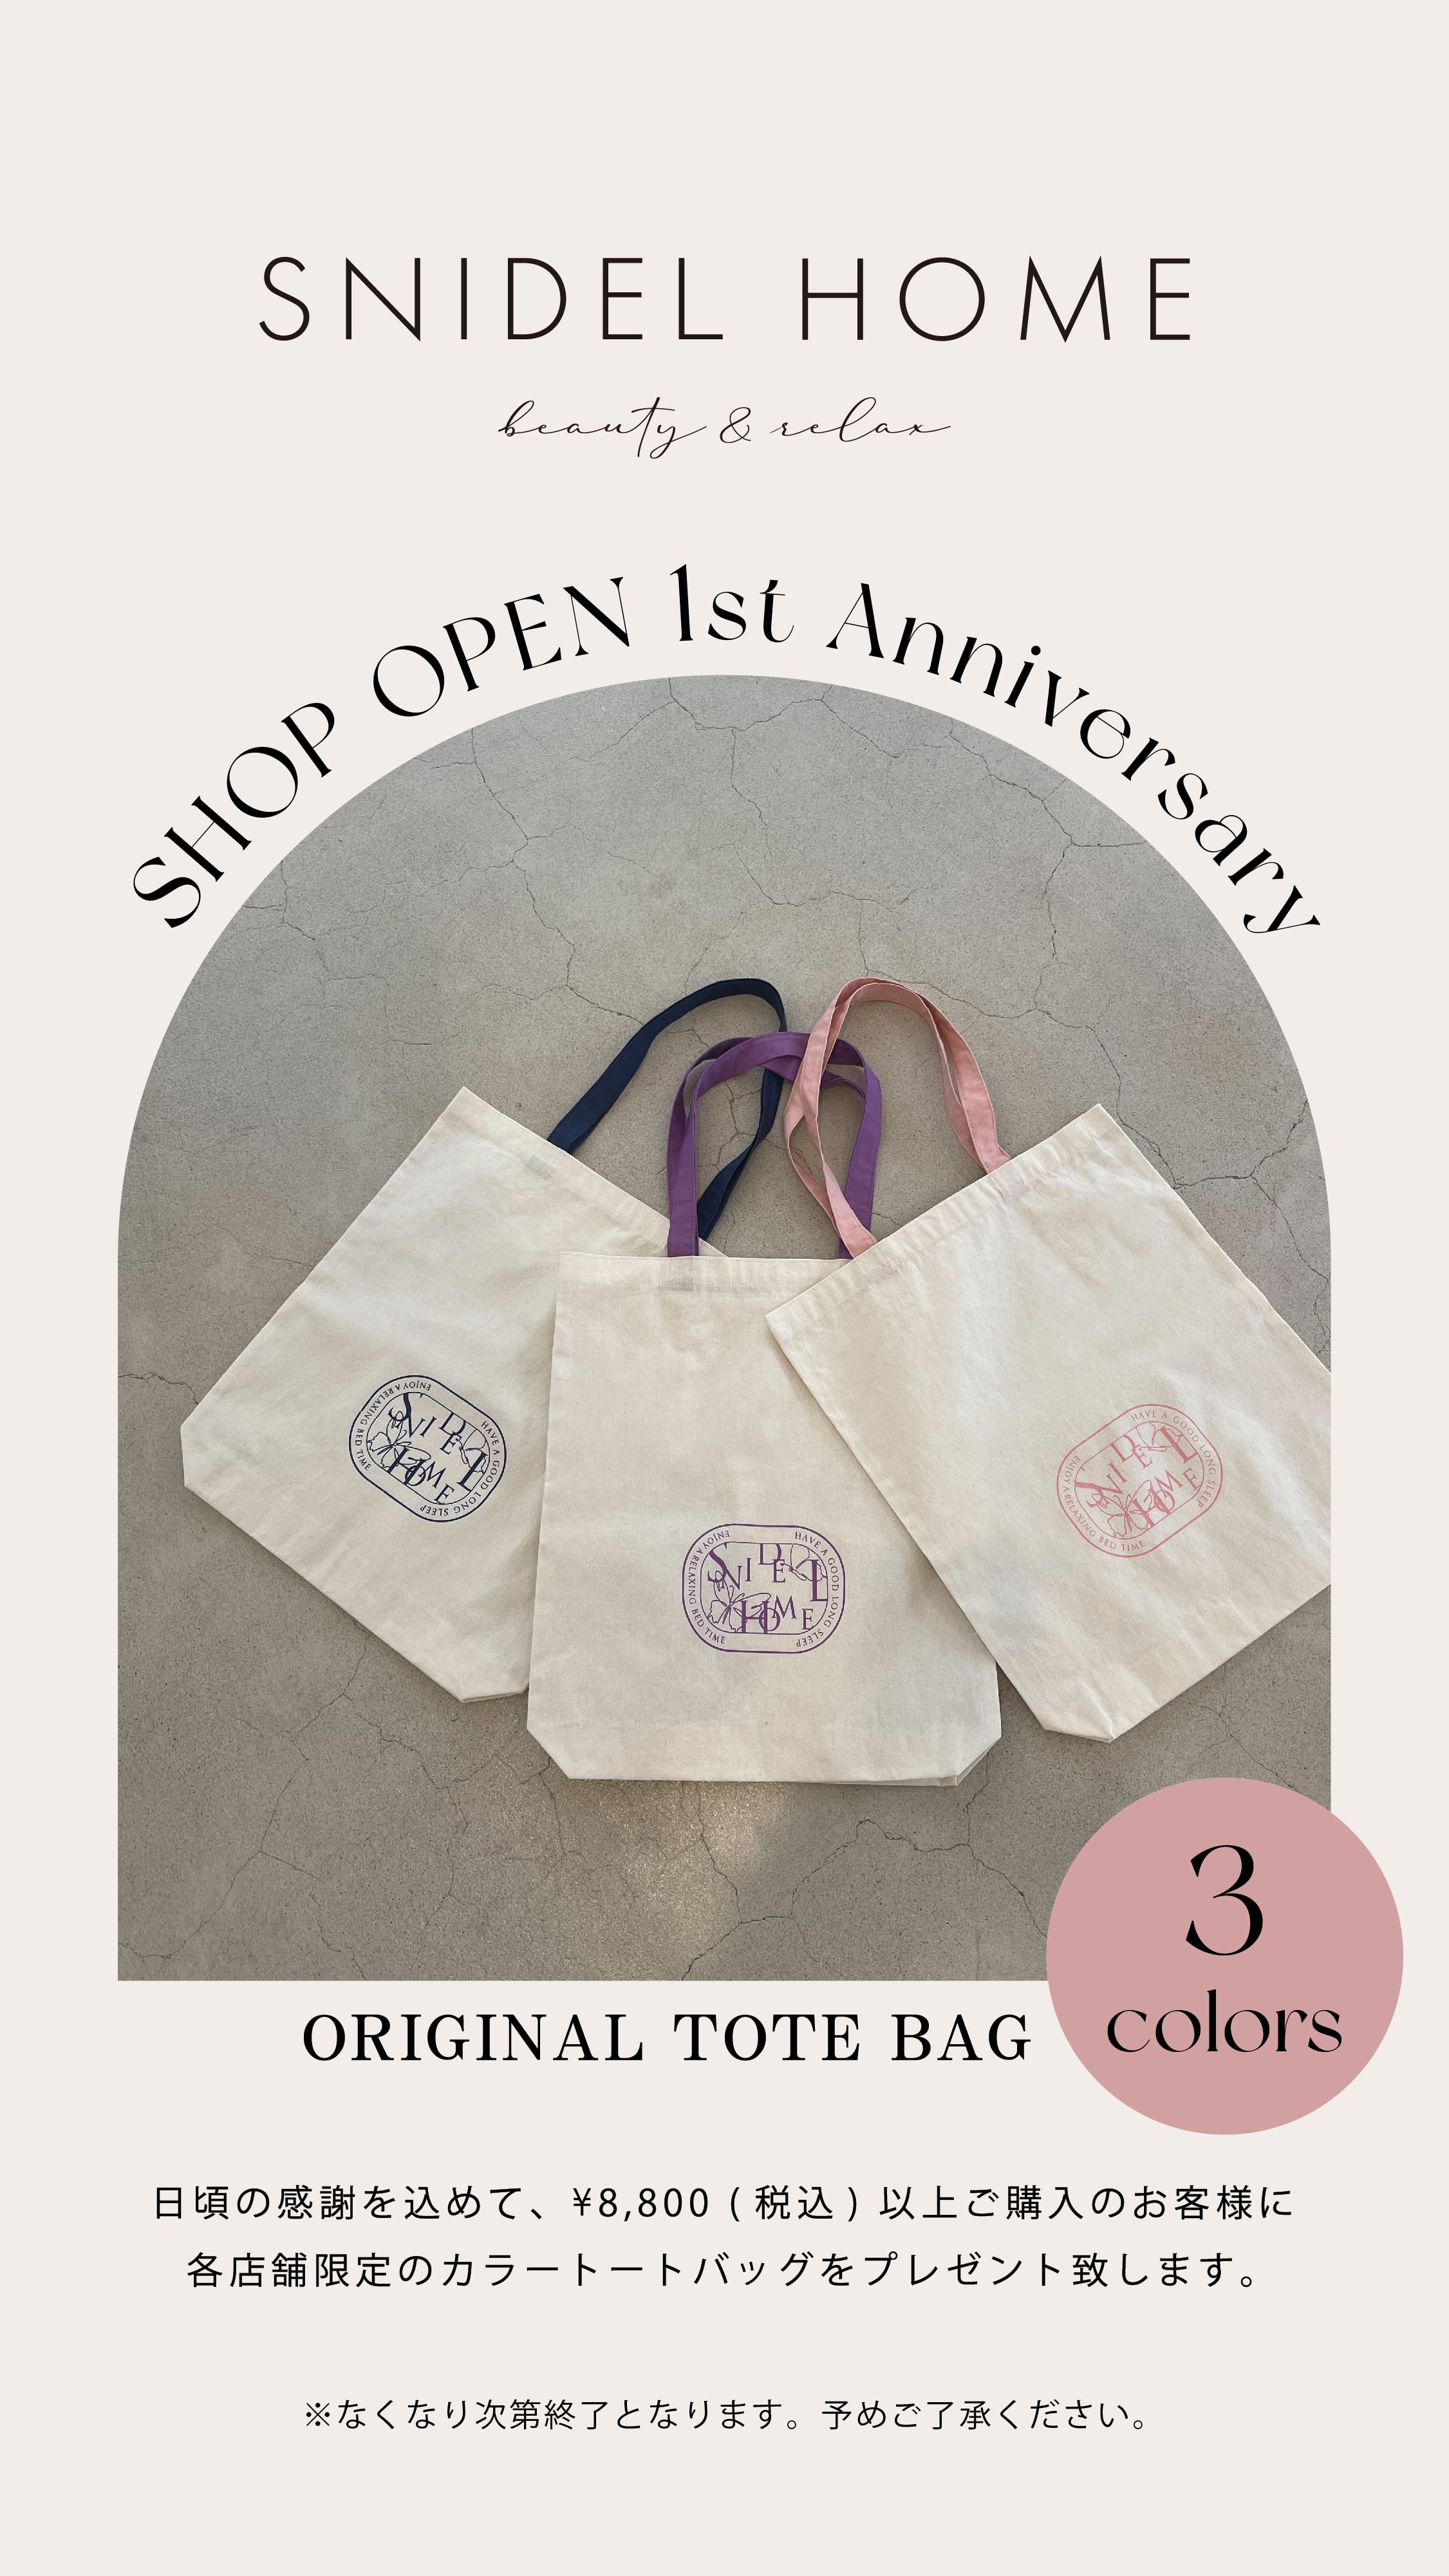 SNIDEL HOME SHOP OPEN 1st Anniversary